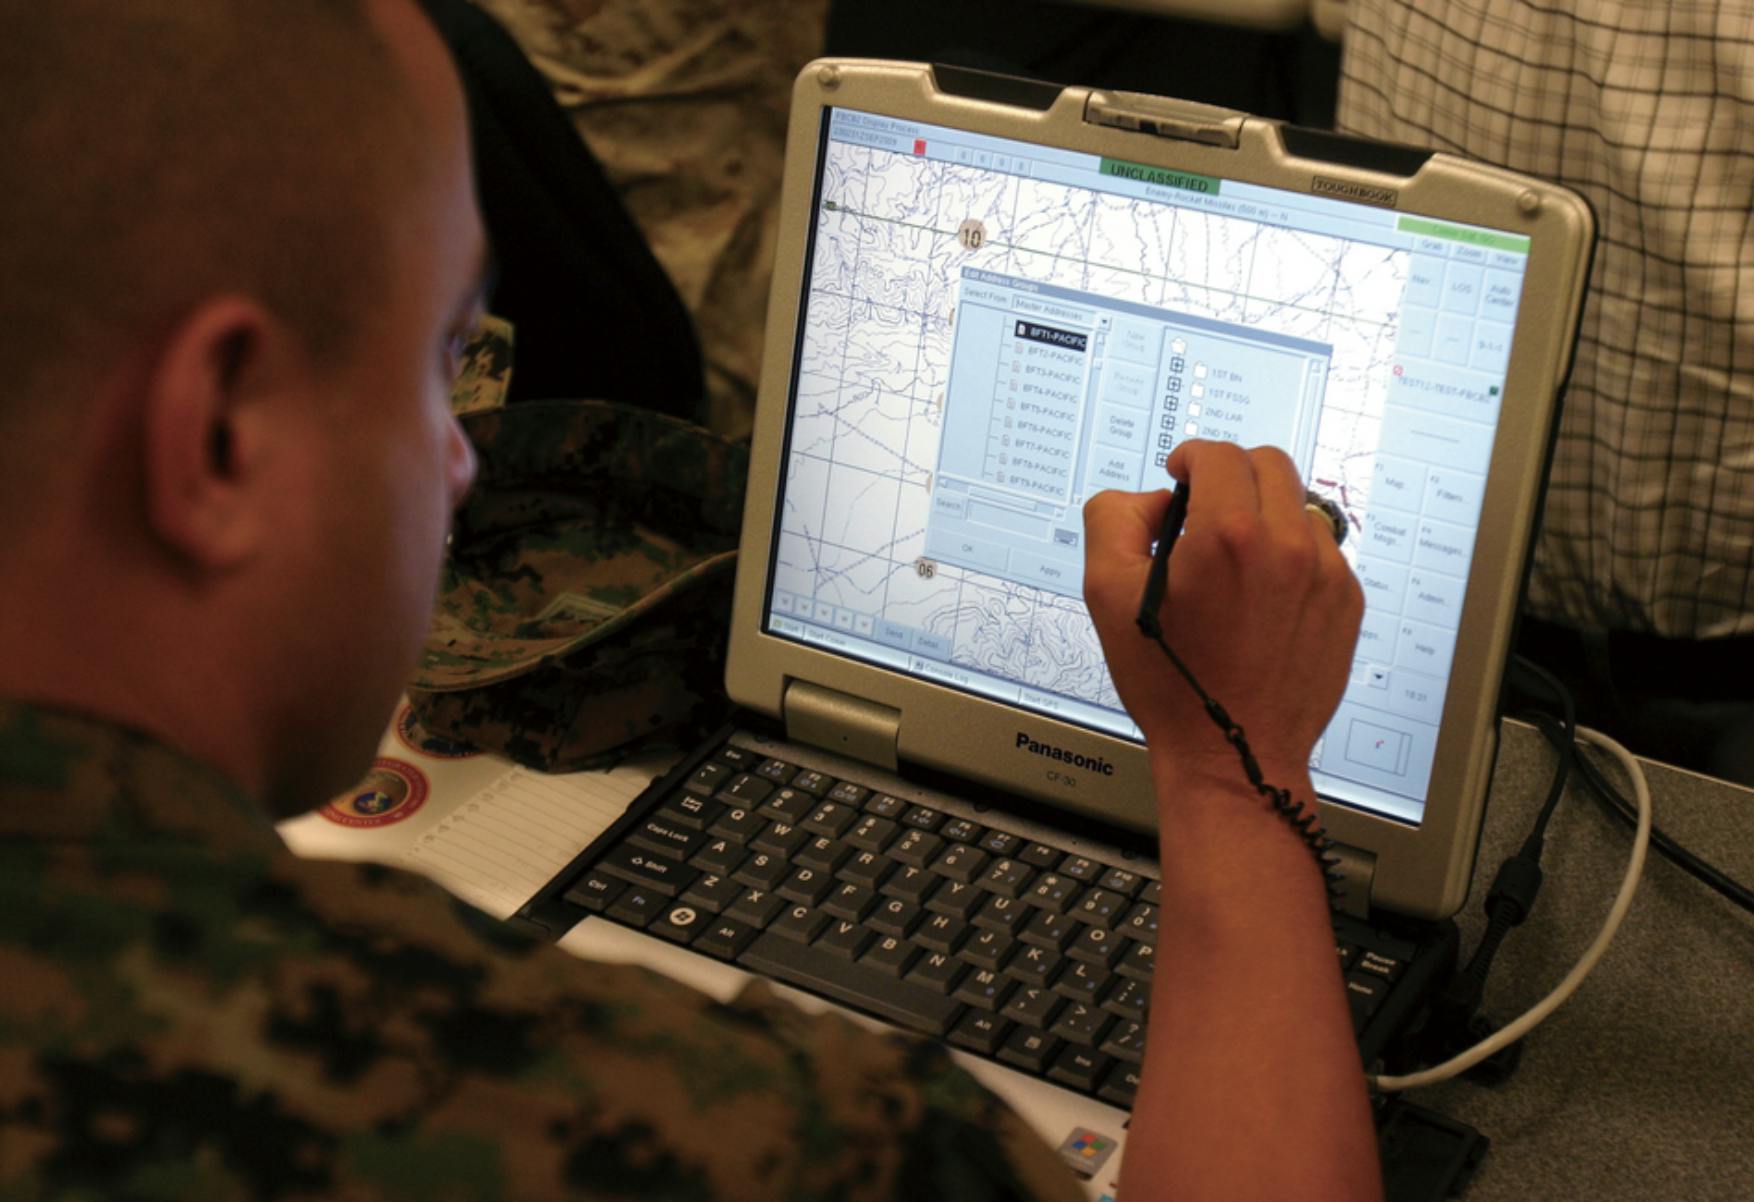 Image overlooking shoulder of a soldier in fatigues looking at a laptop screen and filling in information. Related to: data architecture, modernized systems, data modernization strategy, data ecosystem, federal data ecosystem, and data modernization goals.